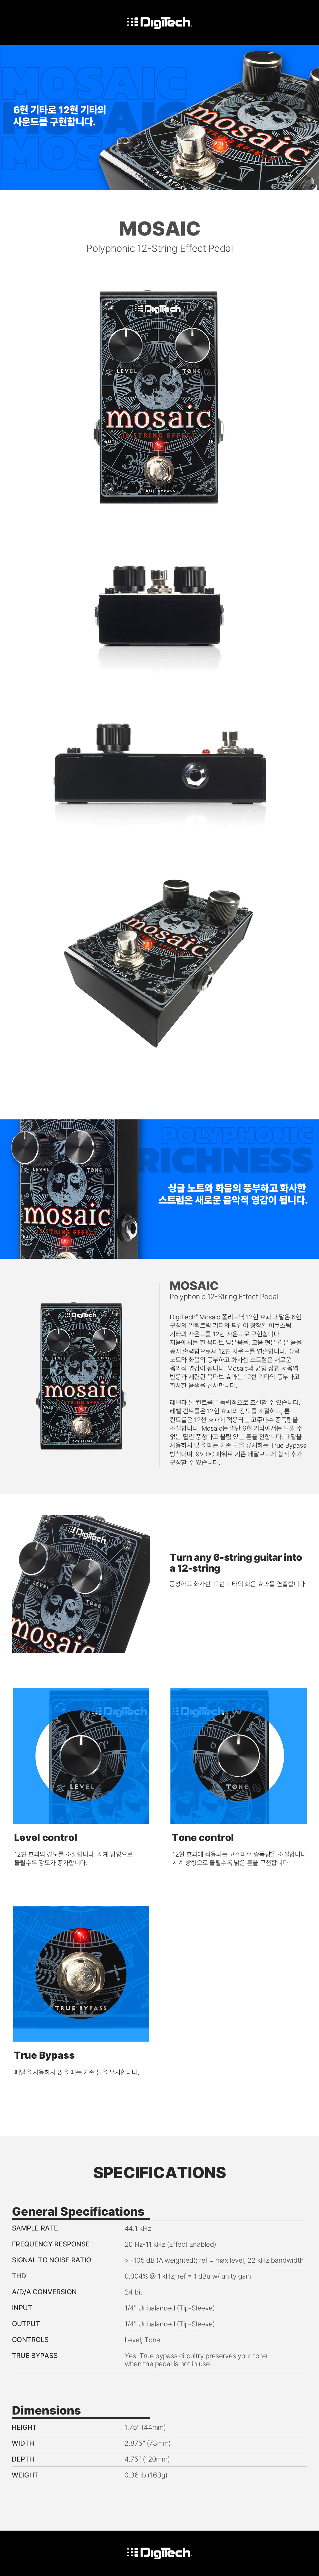 Mosaic-Product-page-1200px_152407.jpg